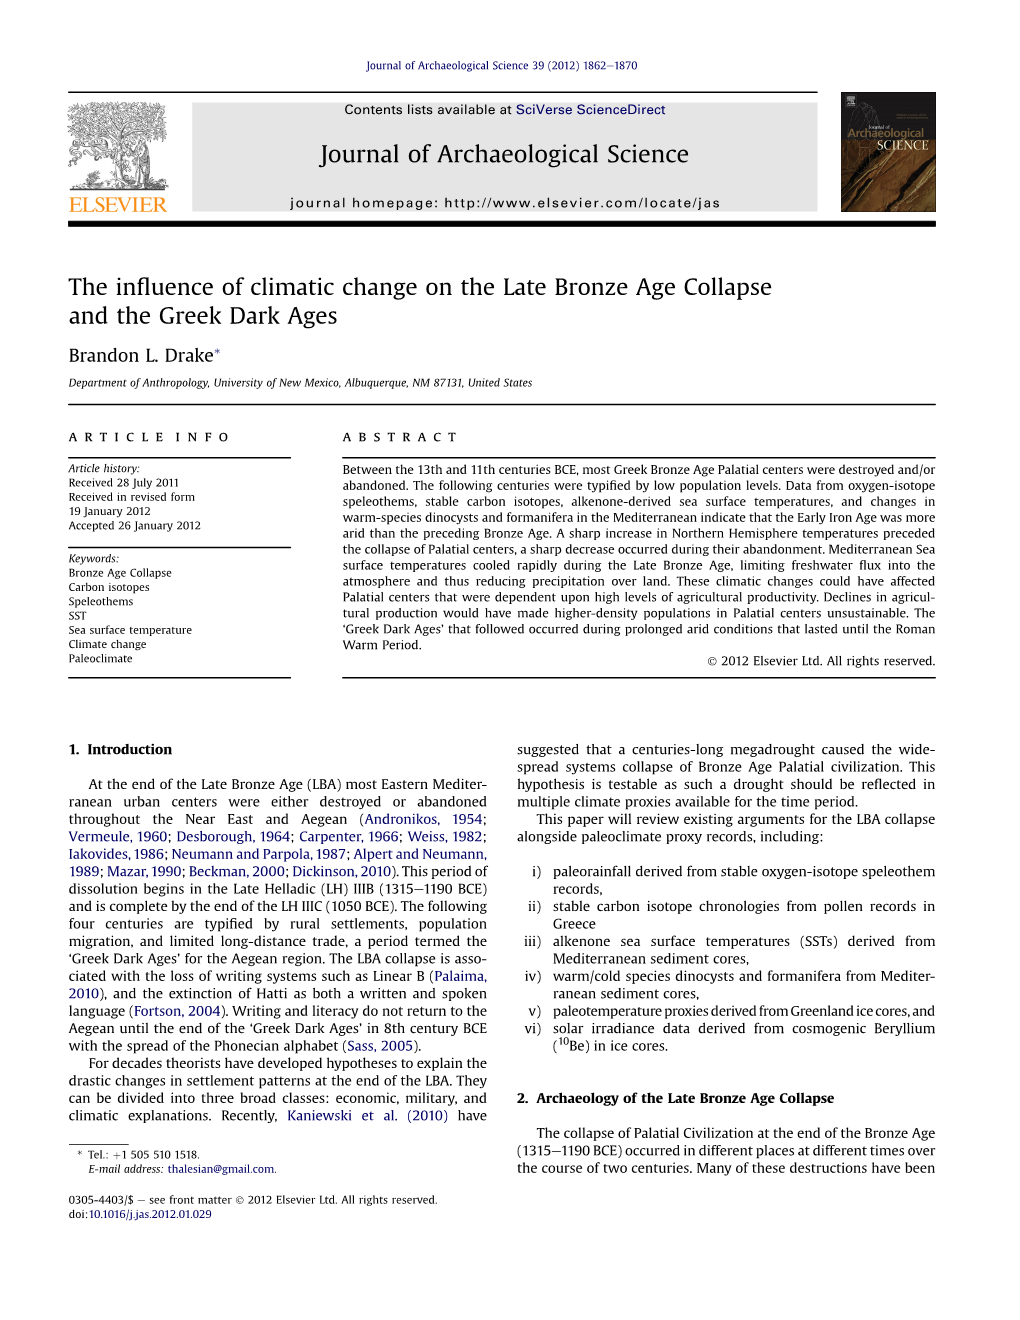 The Influence of Climatic Change on the Late Bronze Age Collapse and the Greek Dark Ages Journal of Archaeological Science